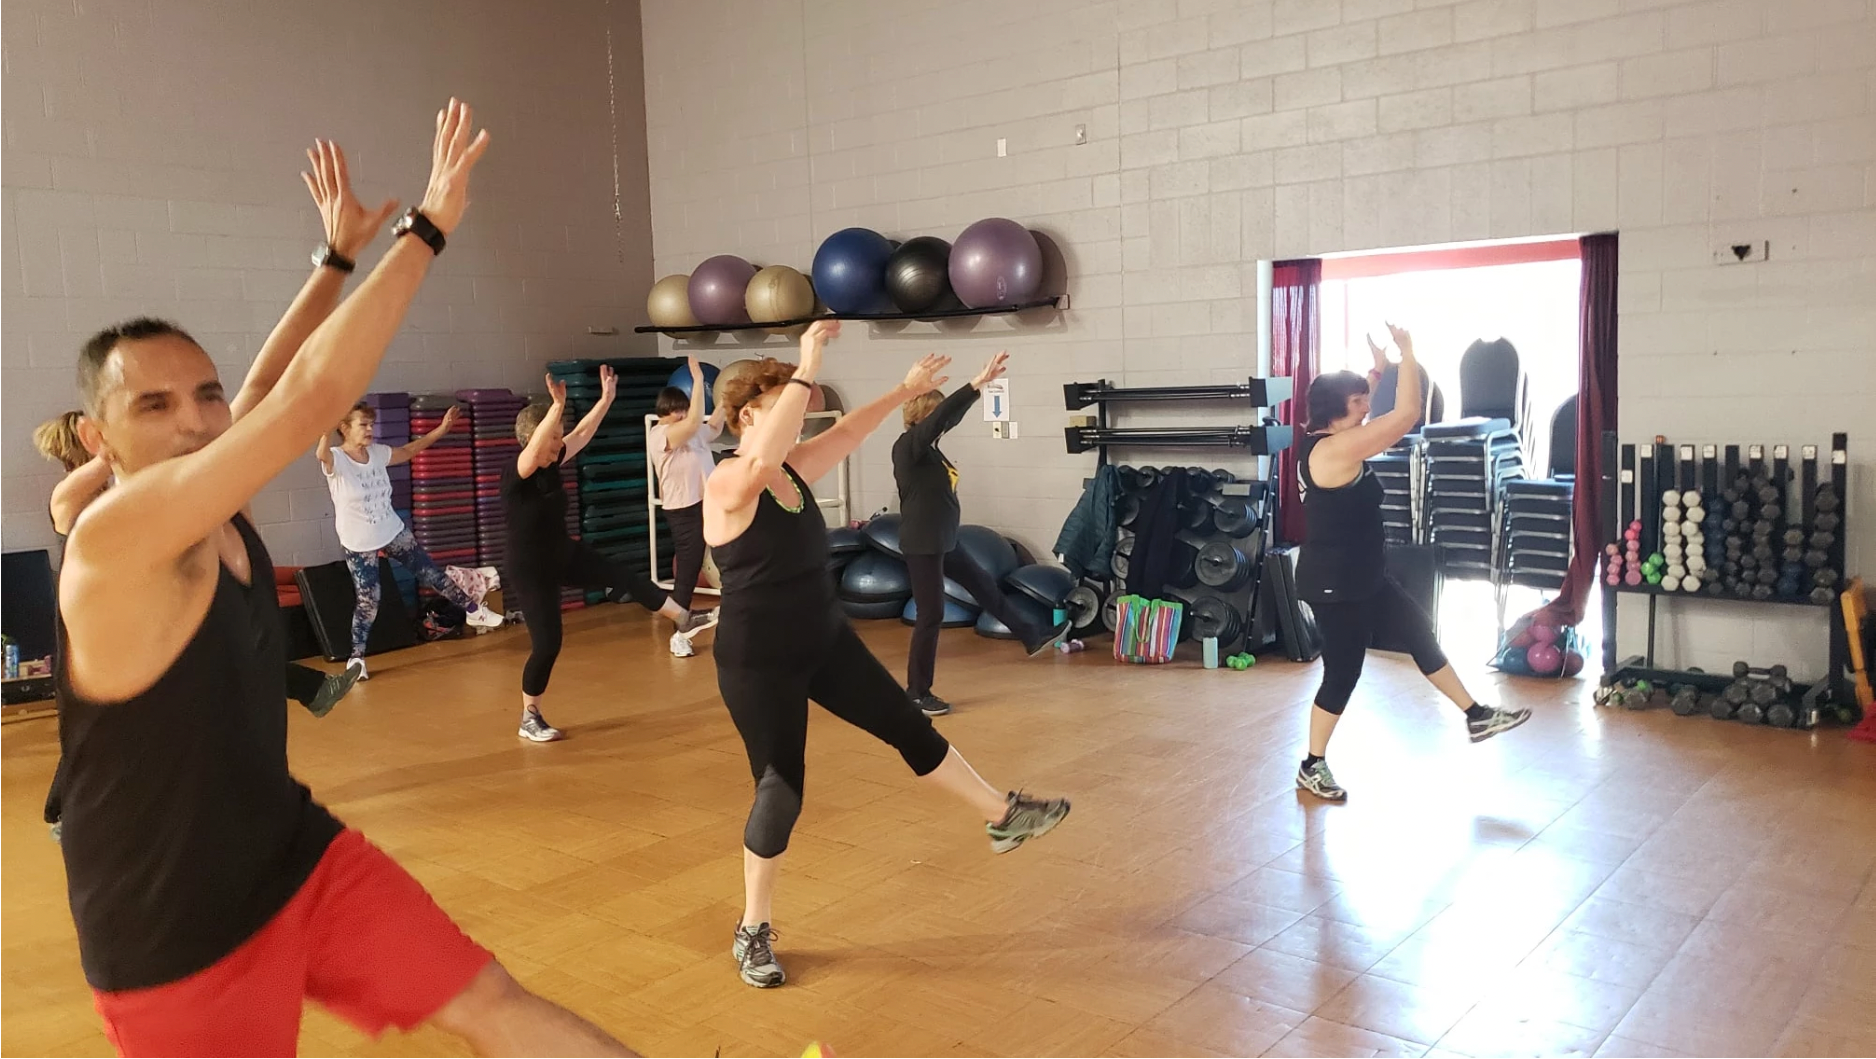 People participating in a fitness dance class at High Altitude Health and Fitness.